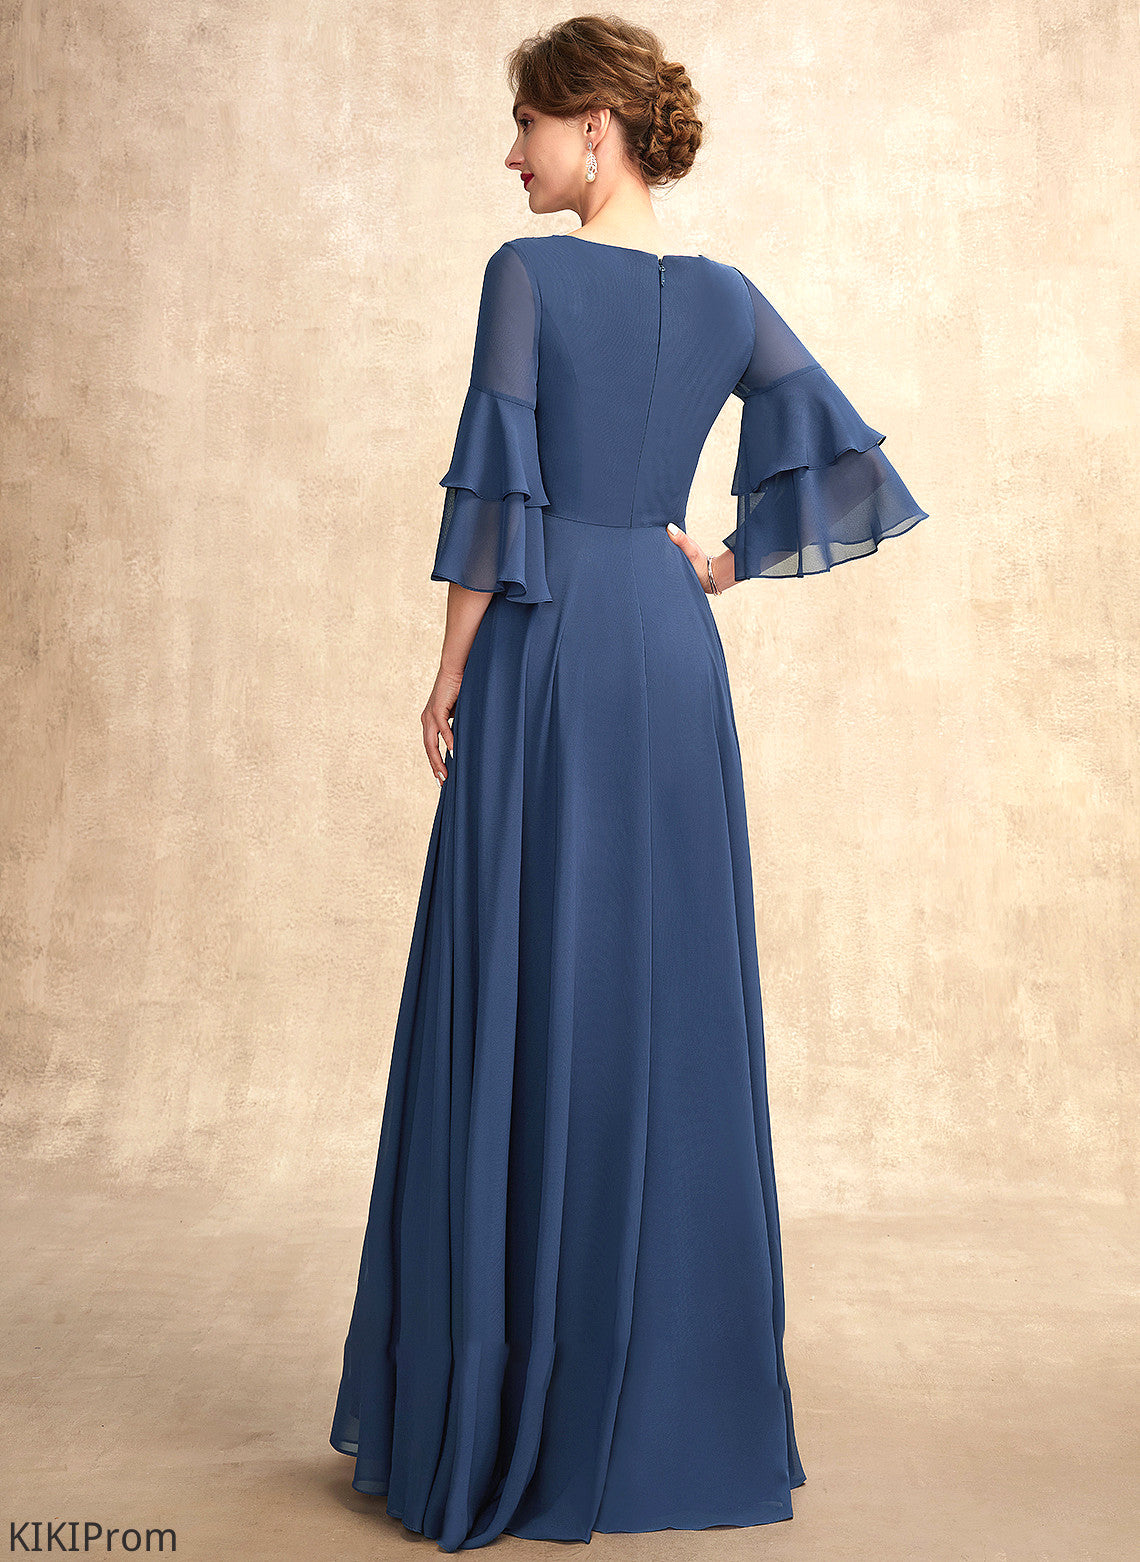 Mother of the Bride Dresses Audrina A-Line Bride Ruffles Floor-Length Dress the Mother Cascading V-neck of With Chiffon